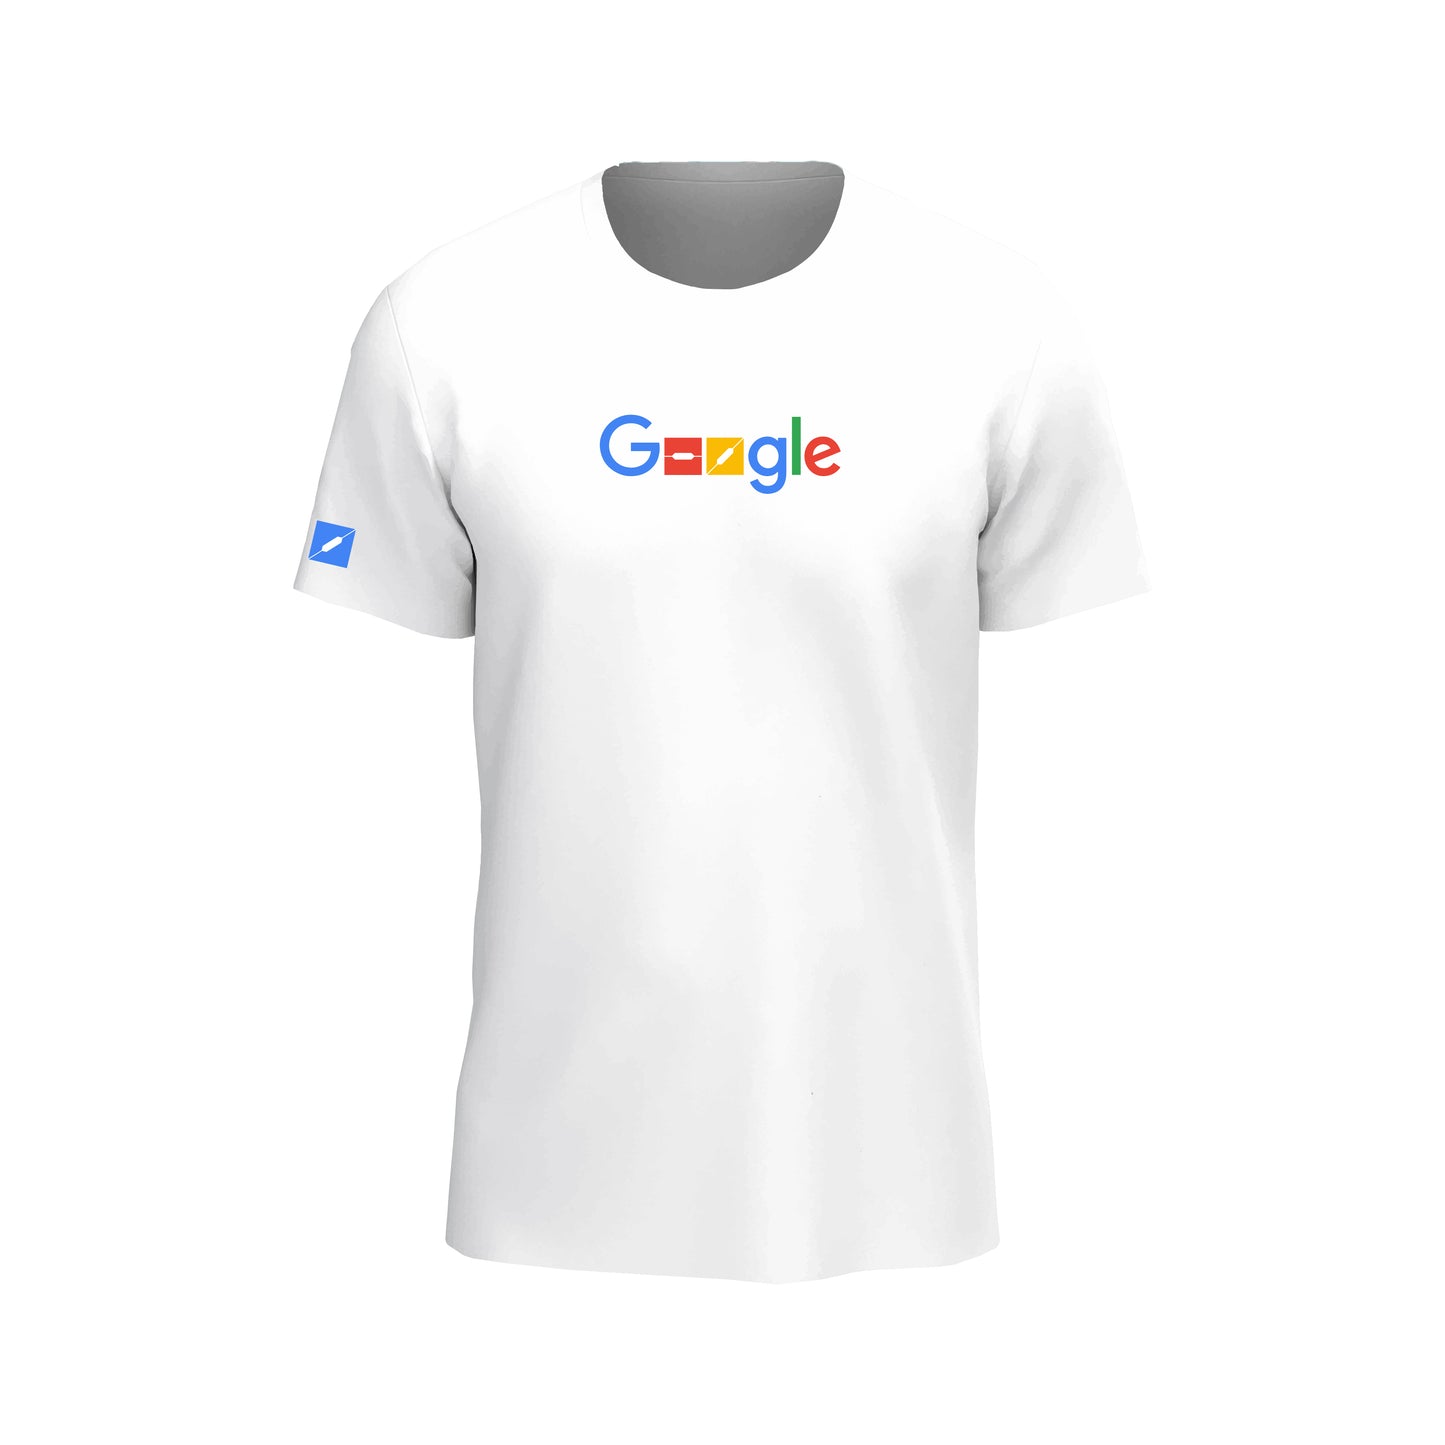 Google - Cyber Force ® T-Shirt by Athletic Forces -  Model 3